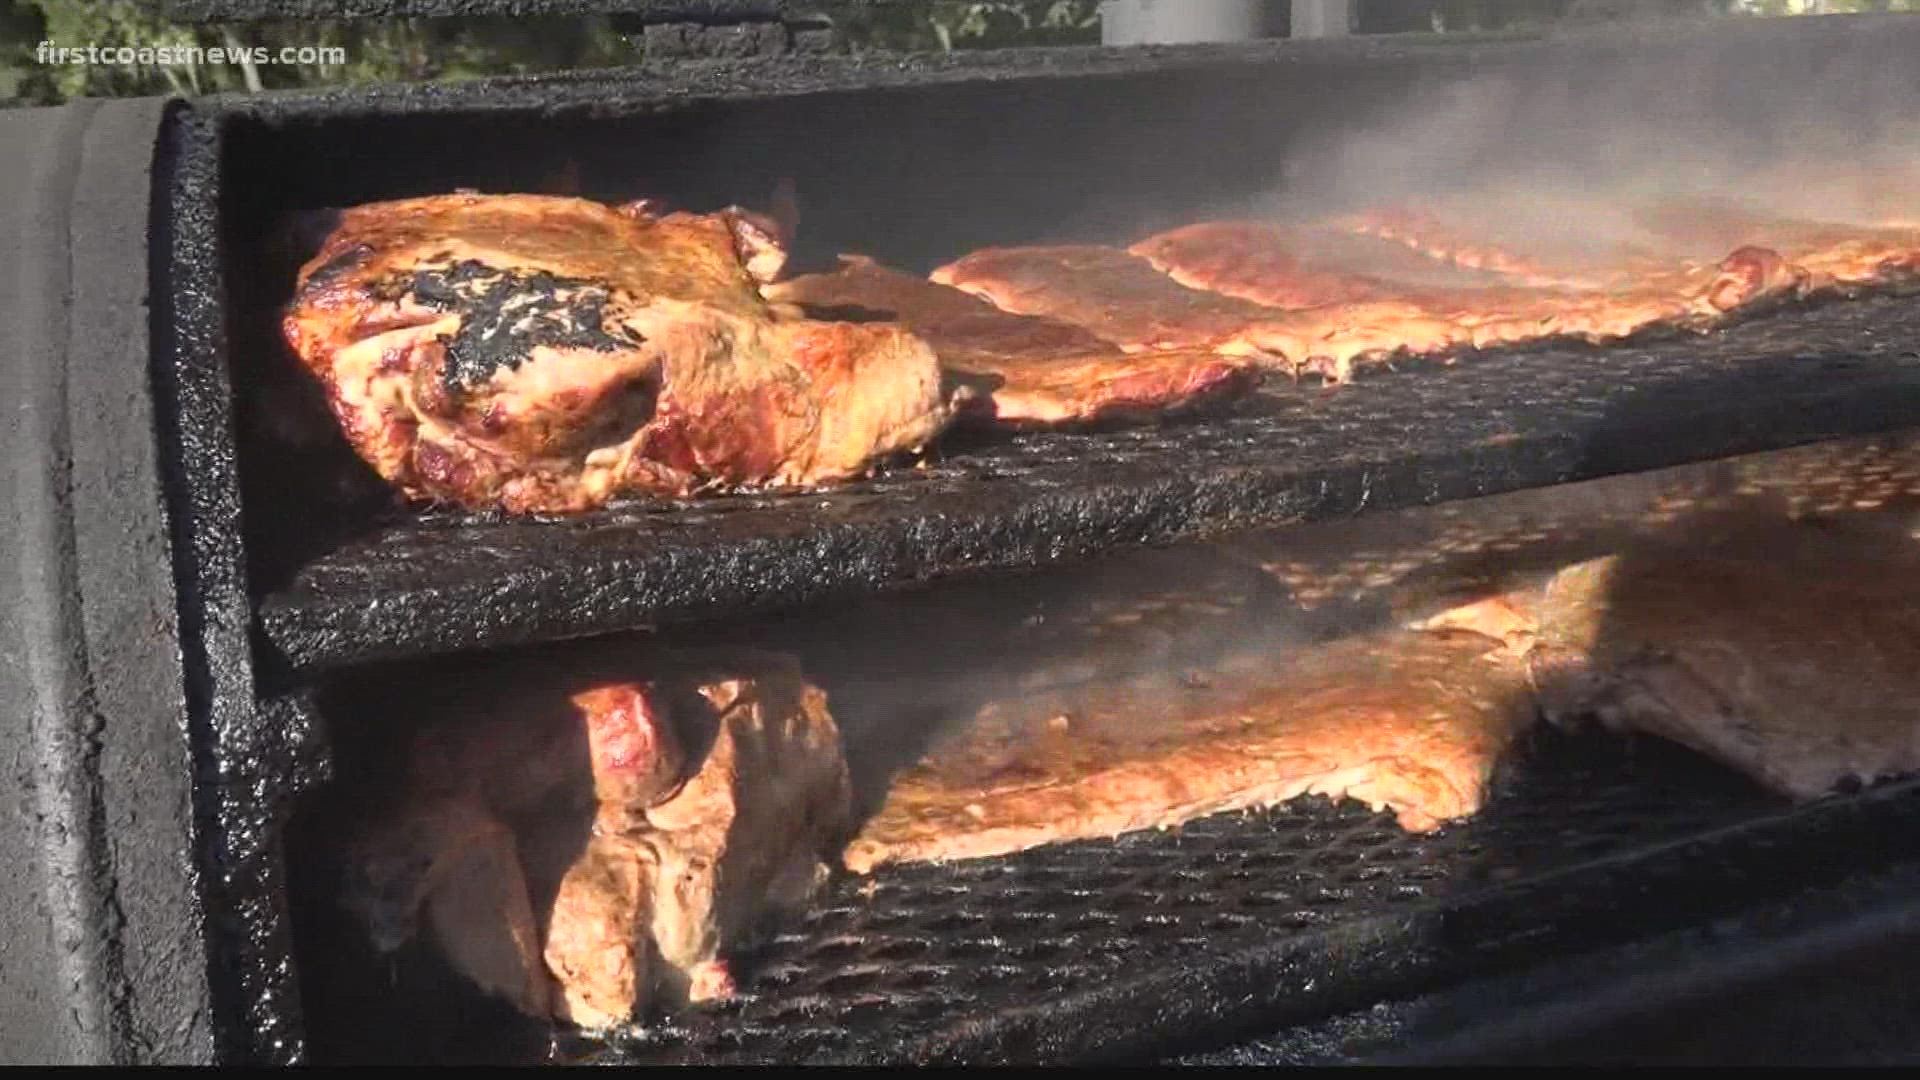 "You're forced to go up or you're forced to go out of business," said Melvin Williams, owner of Smoke in the City BBQ.